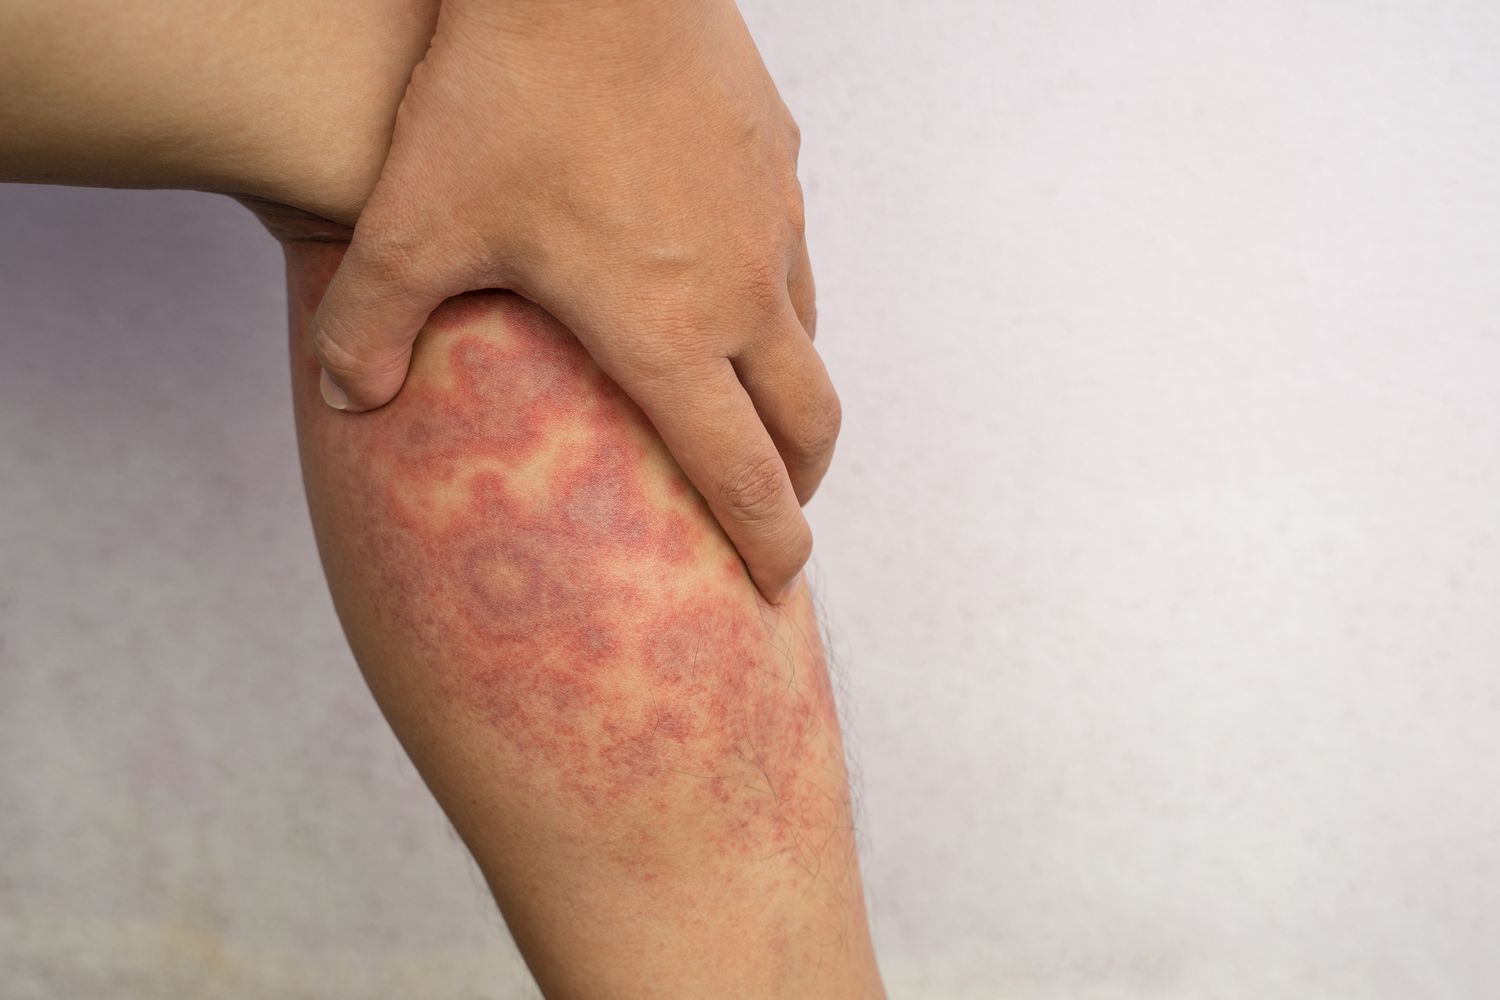 What are the most common symptoms of eczema?